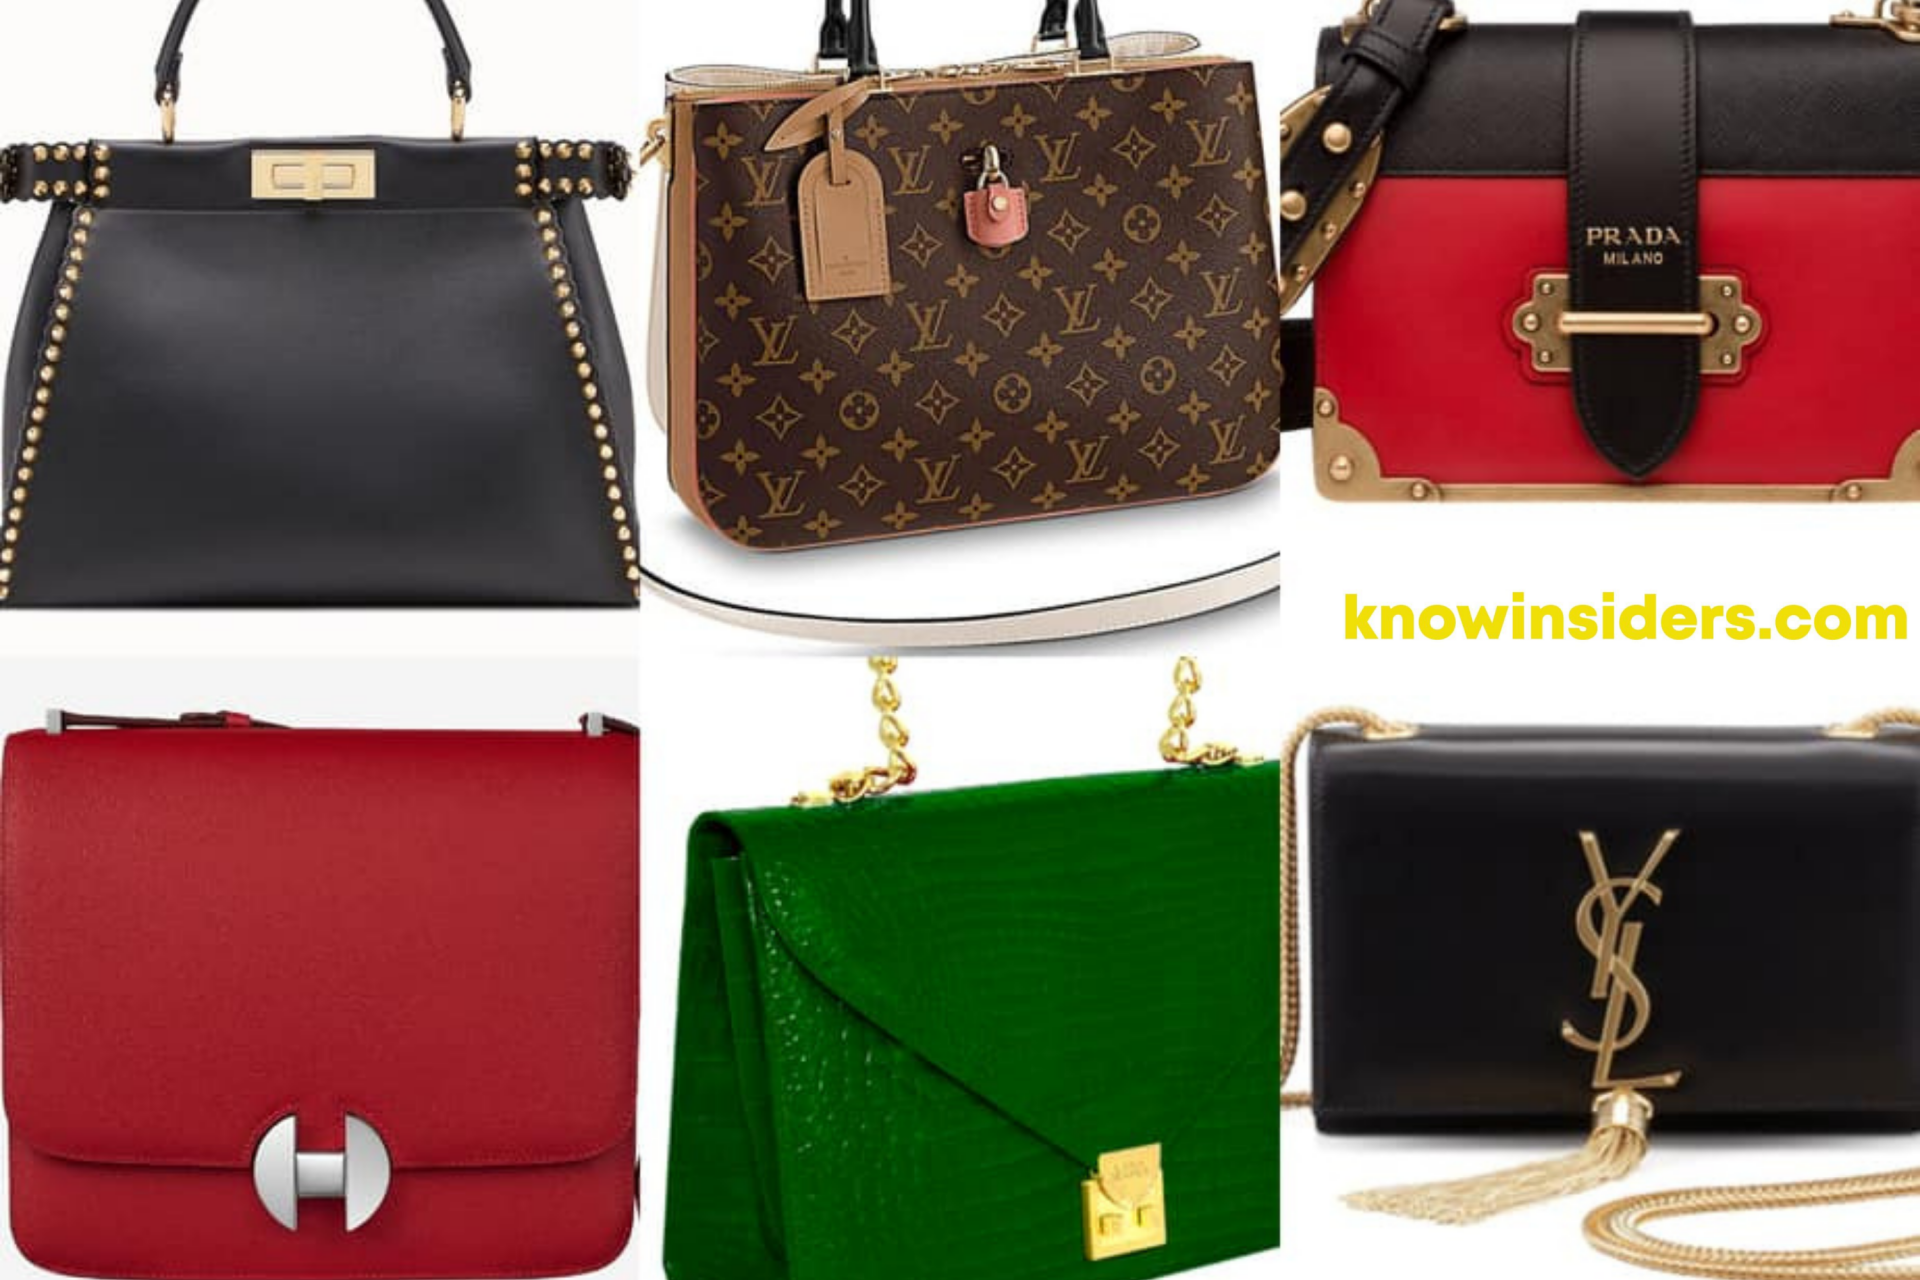 Top 10 Most Expensive Handbag Brands in the World